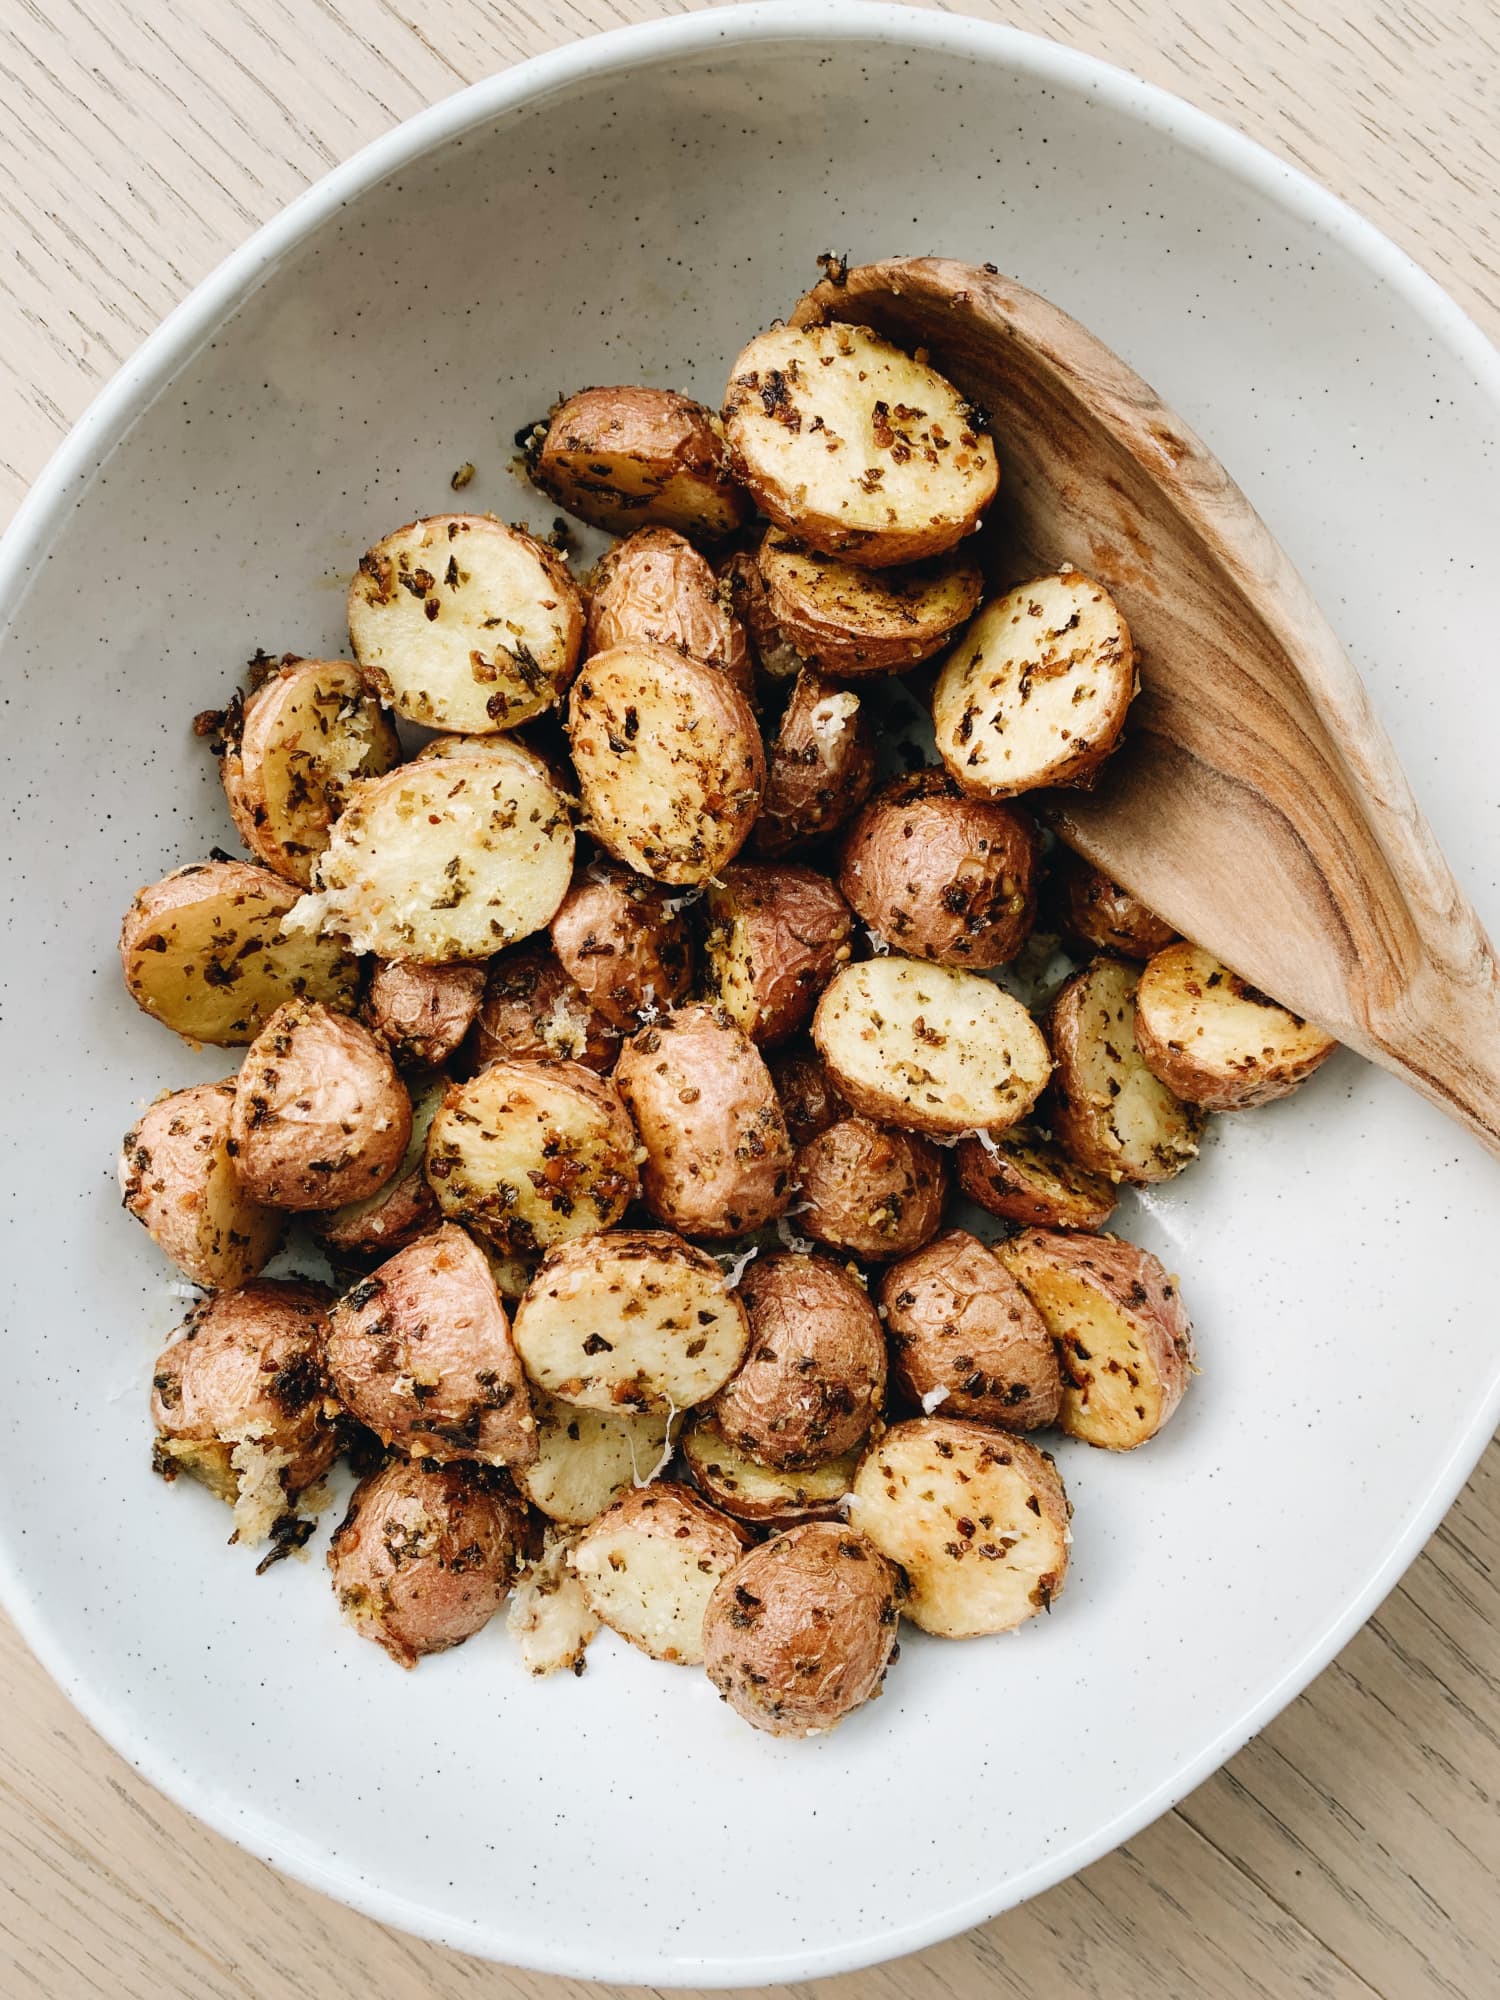 These Parmesan Pesto Roasted Potatoes Are Irresistible